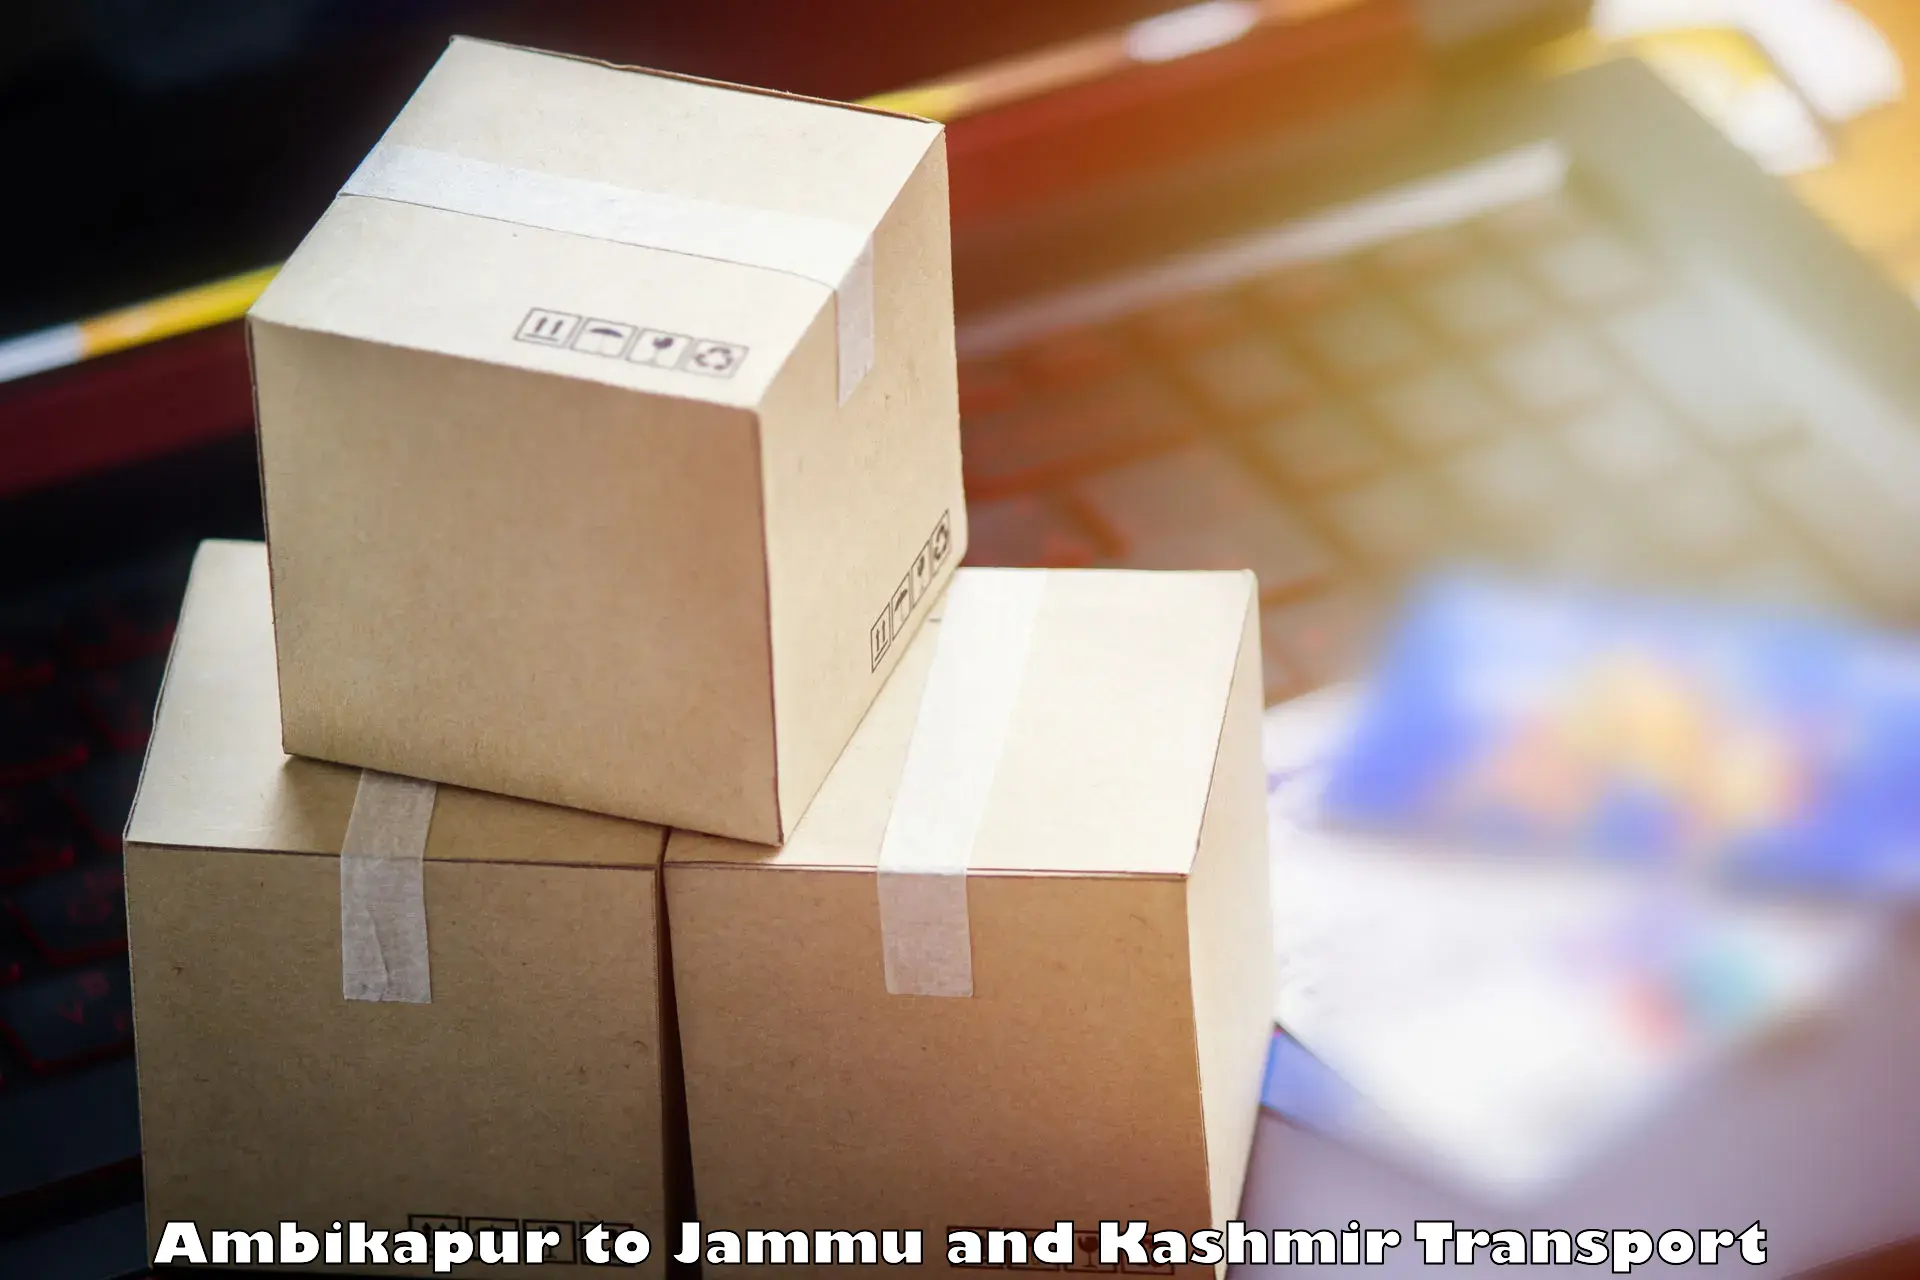 Delivery service Ambikapur to Jammu and Kashmir